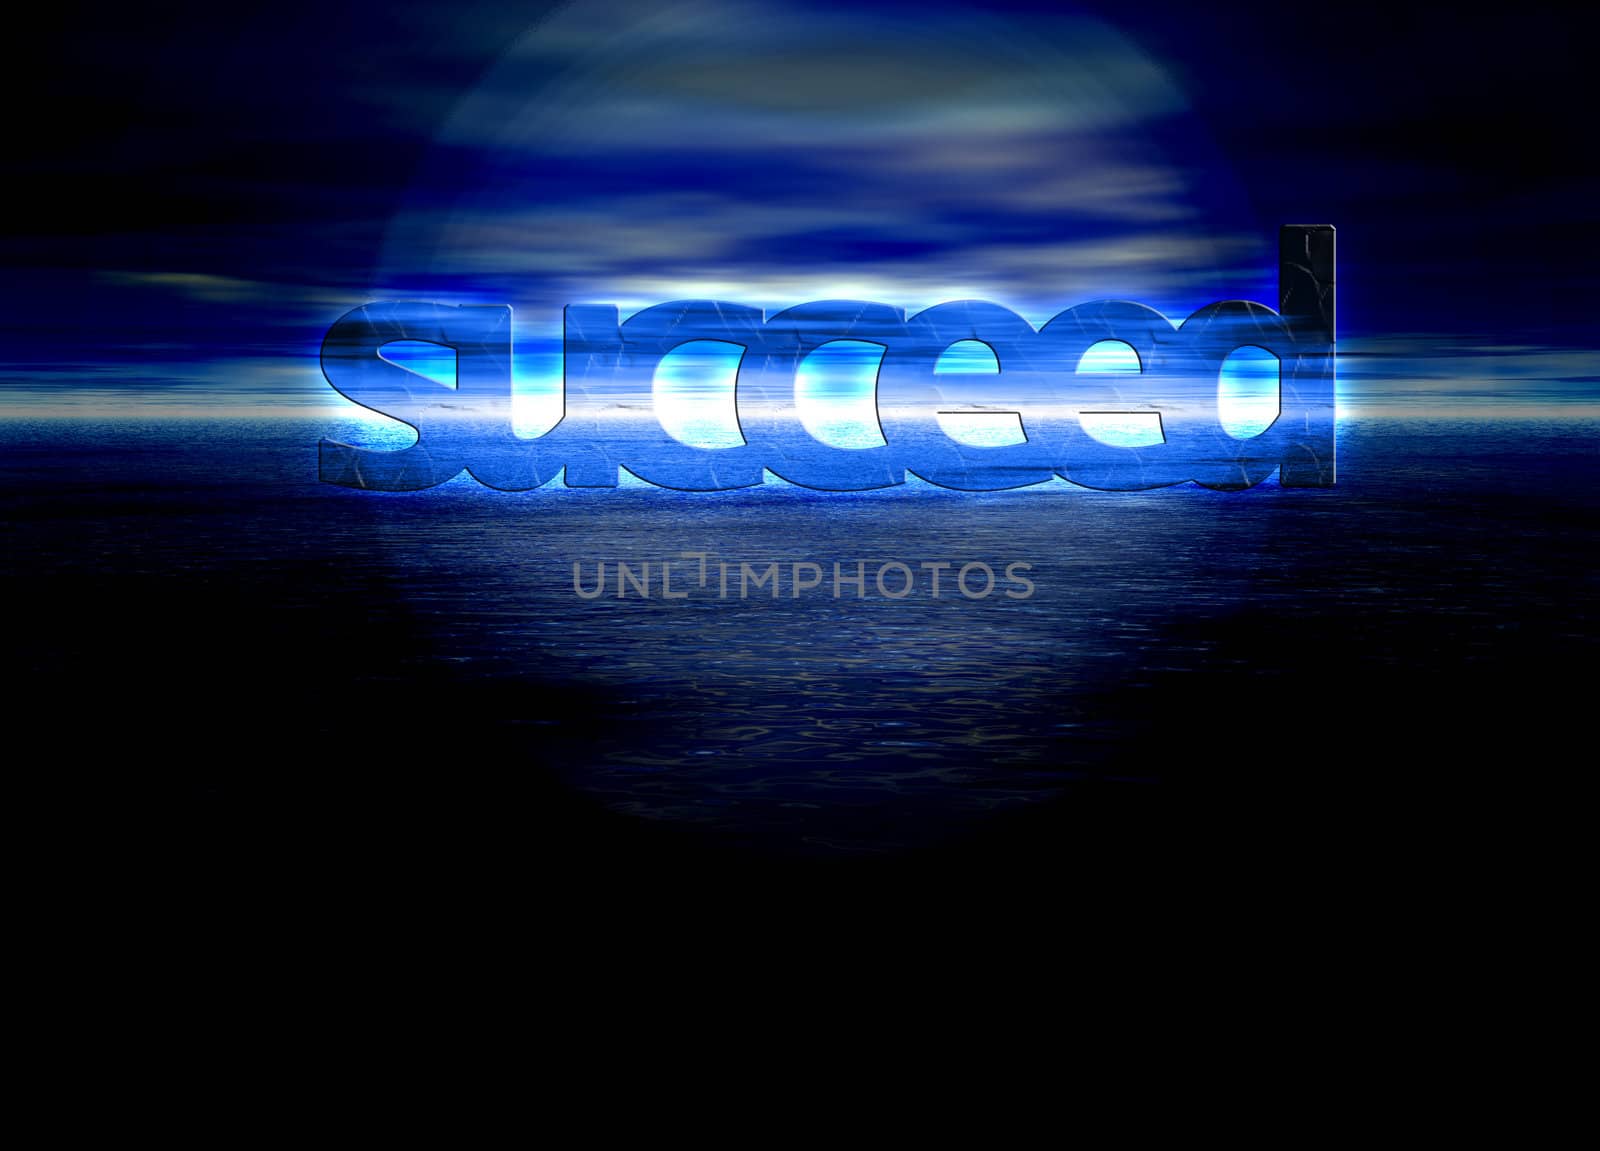 Succeed Text on Stunning Blue Bright Ocean Sea Horizon at Night by bobbigmac